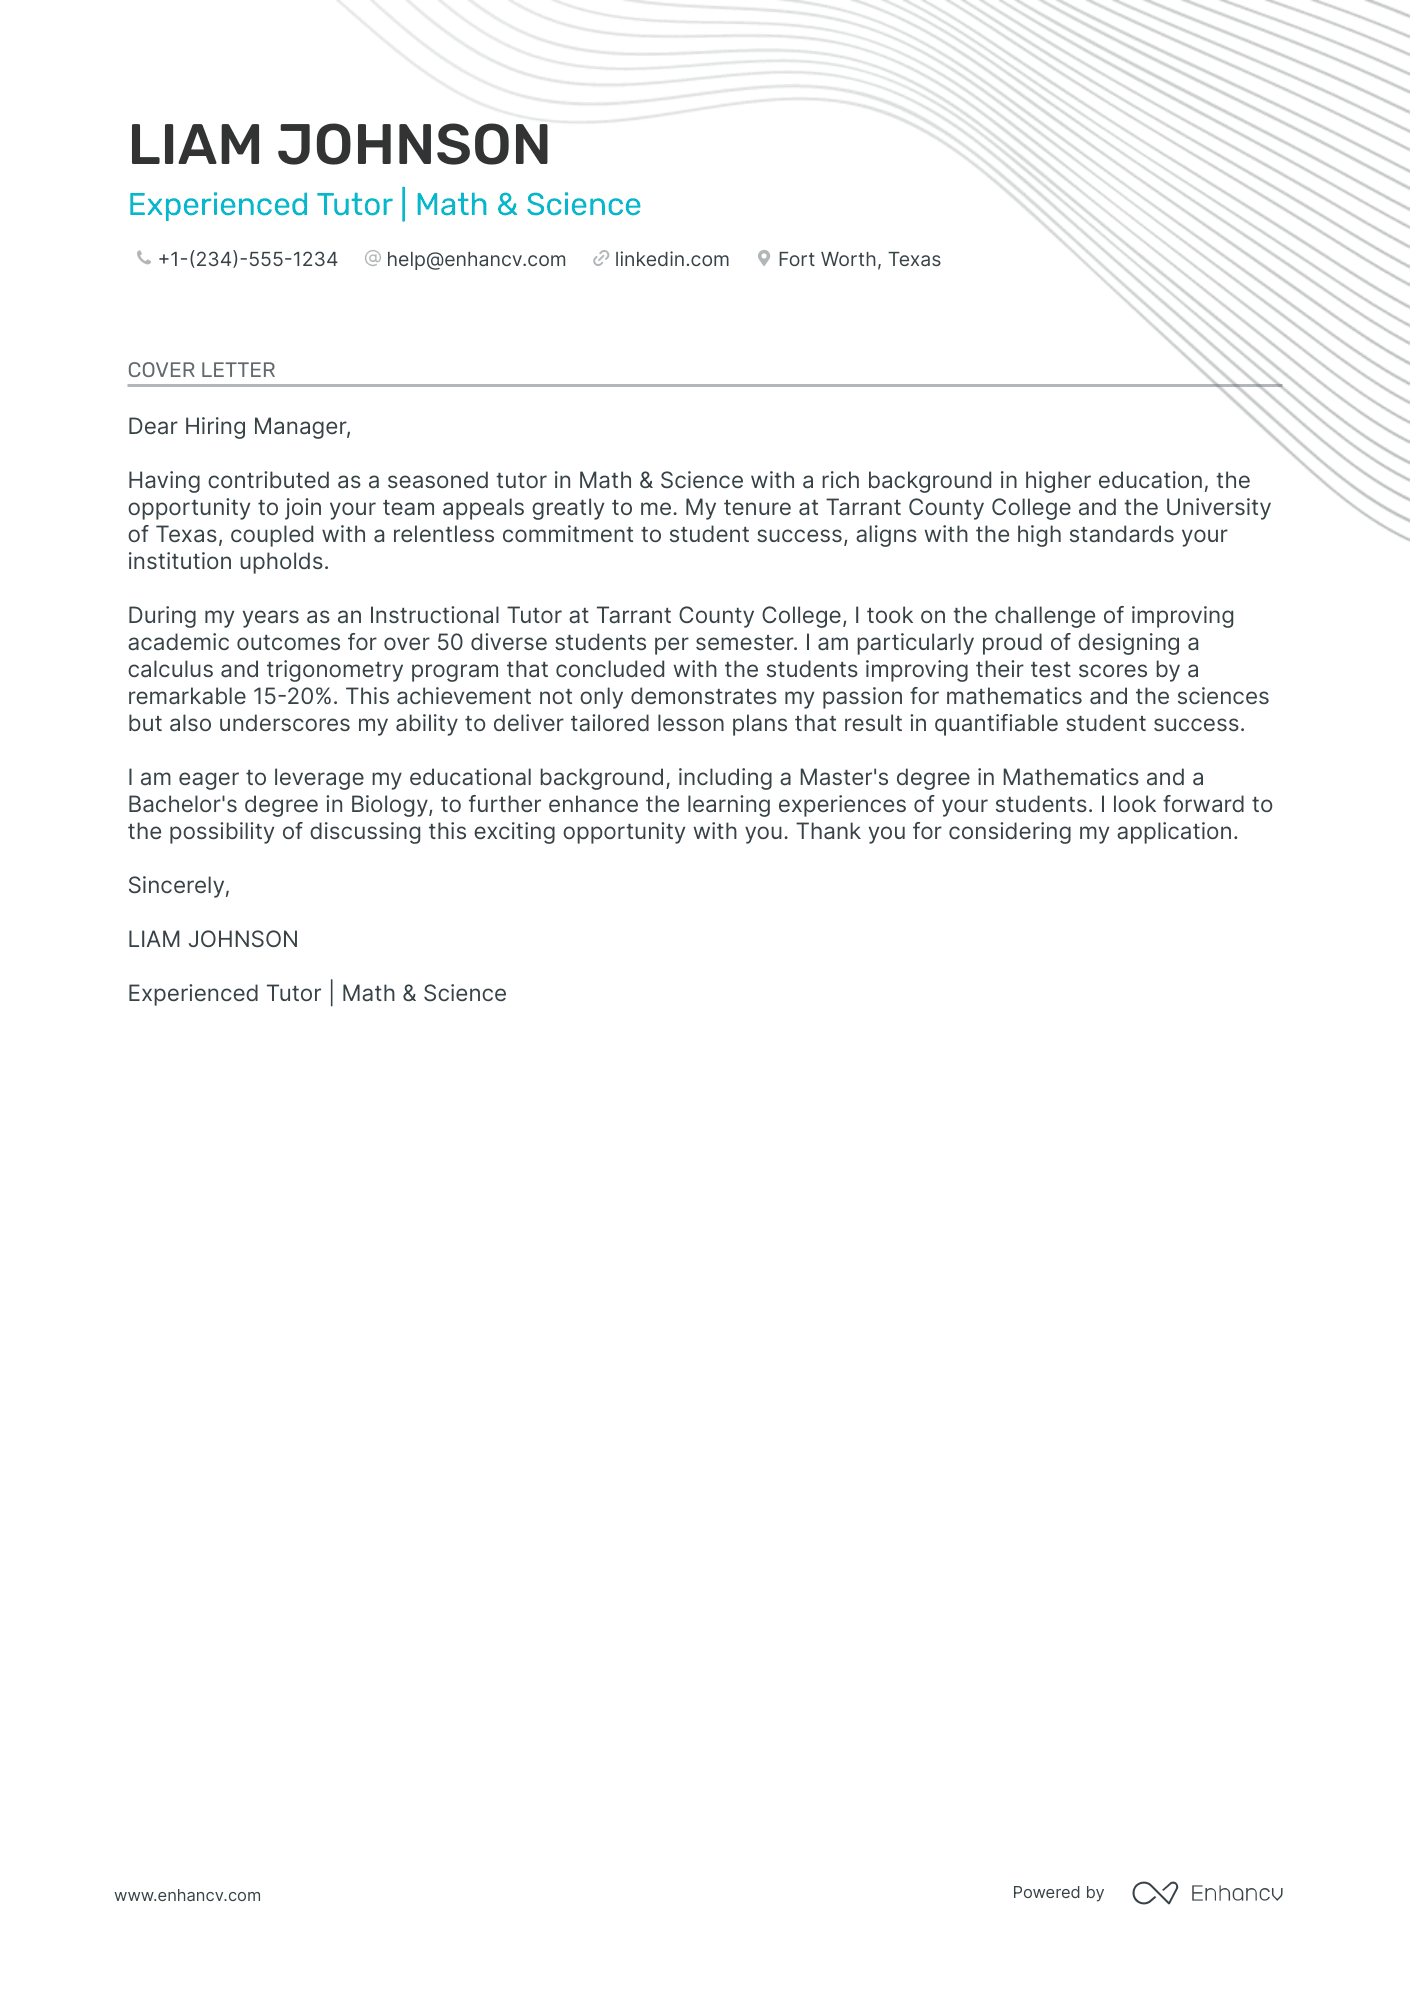 cover letter and resume tutoring